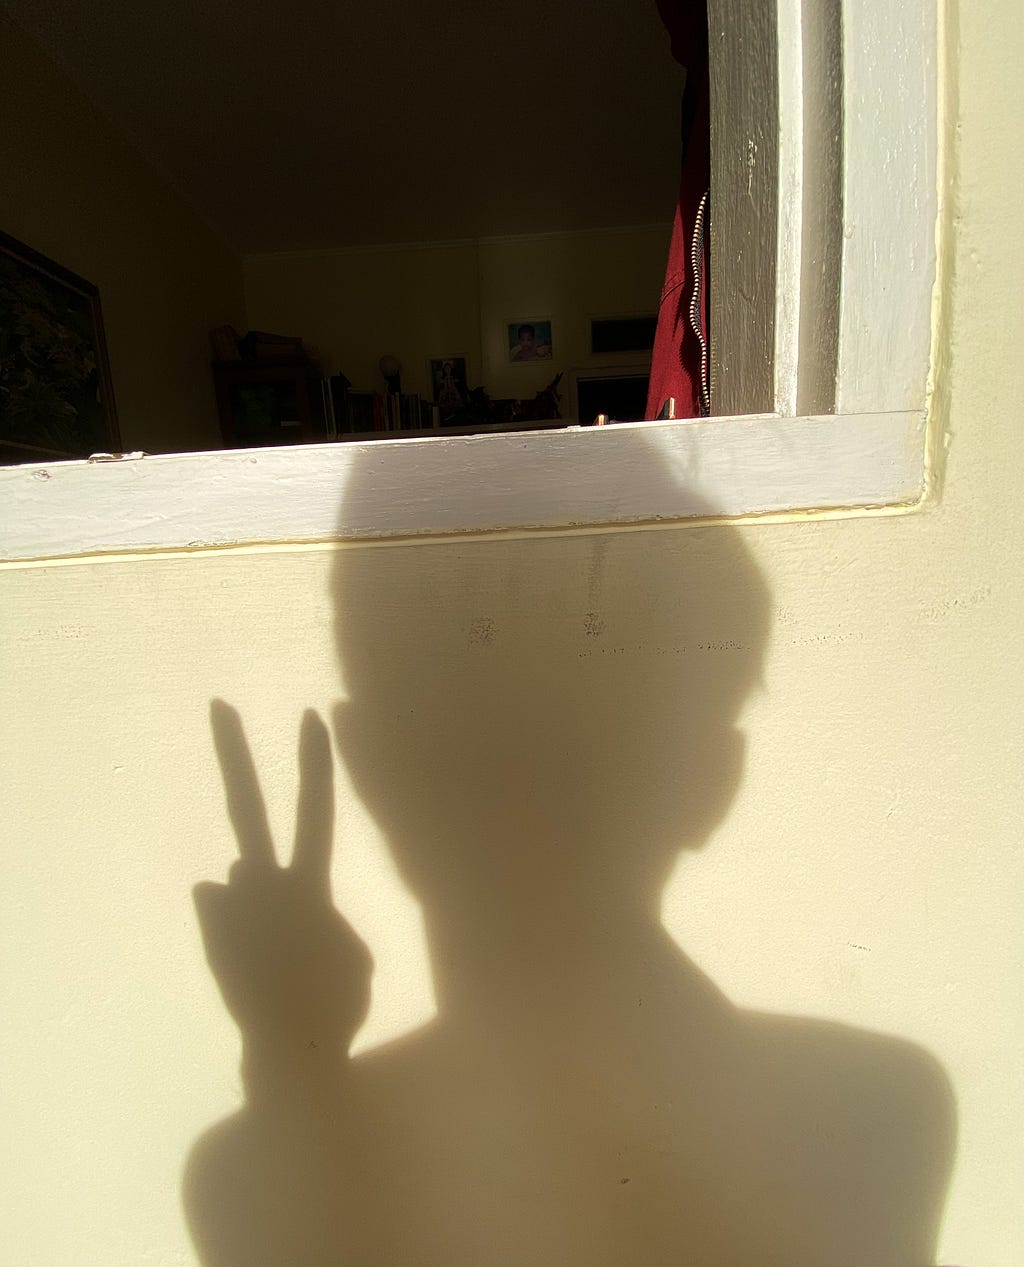 the shadow of myself